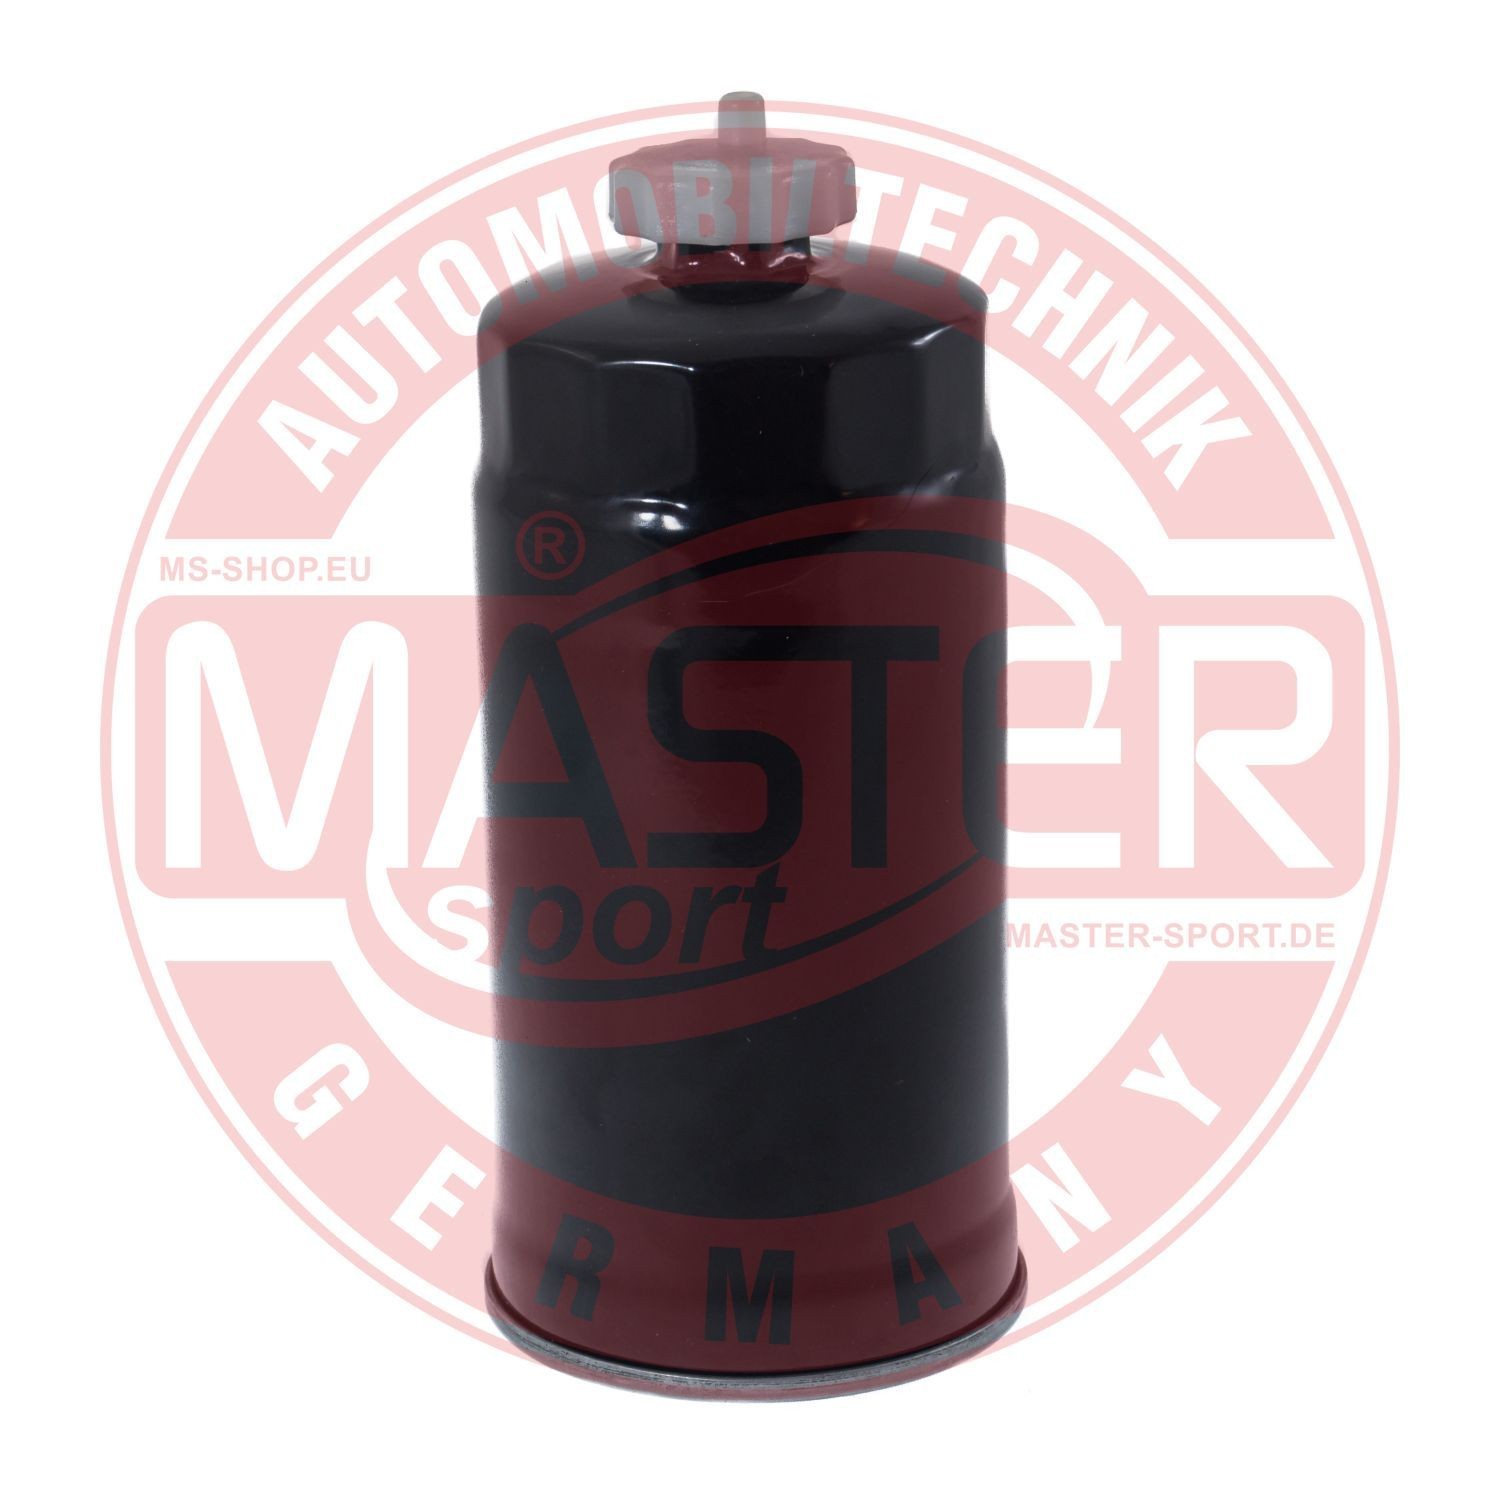 MASTER-SPORT Fuel filter diesel and petrol BMW 5 Touring (E34) new 845/4-KF-PCS-MS